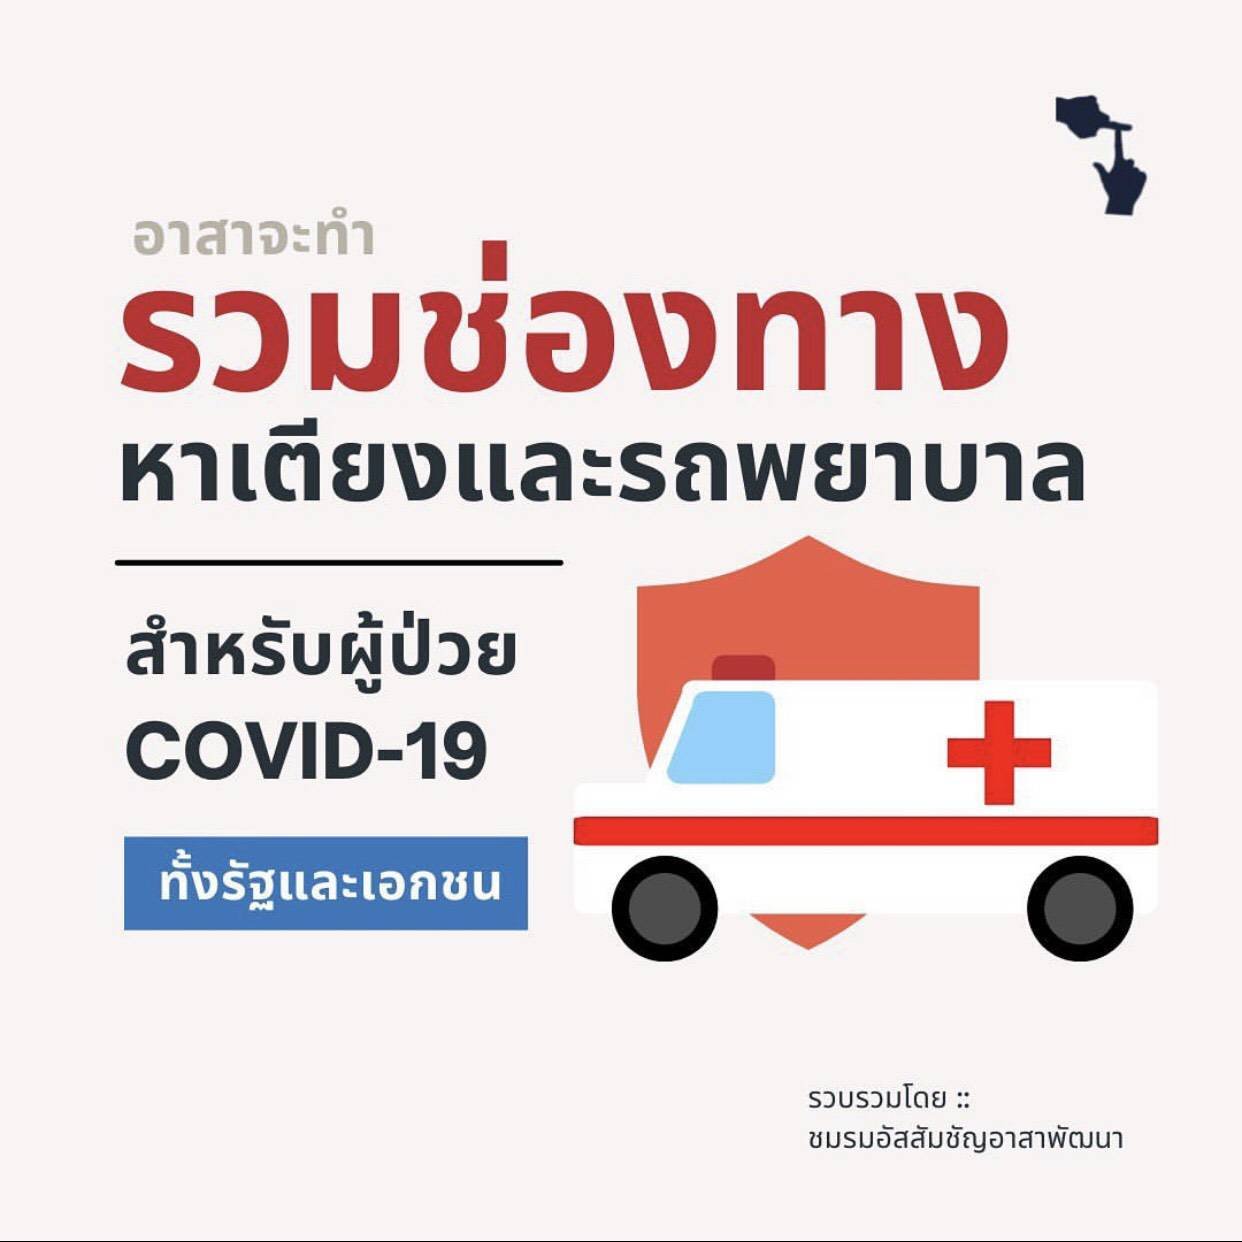 How to find beds in hospitals and ambulance for Covid-19 infected patients